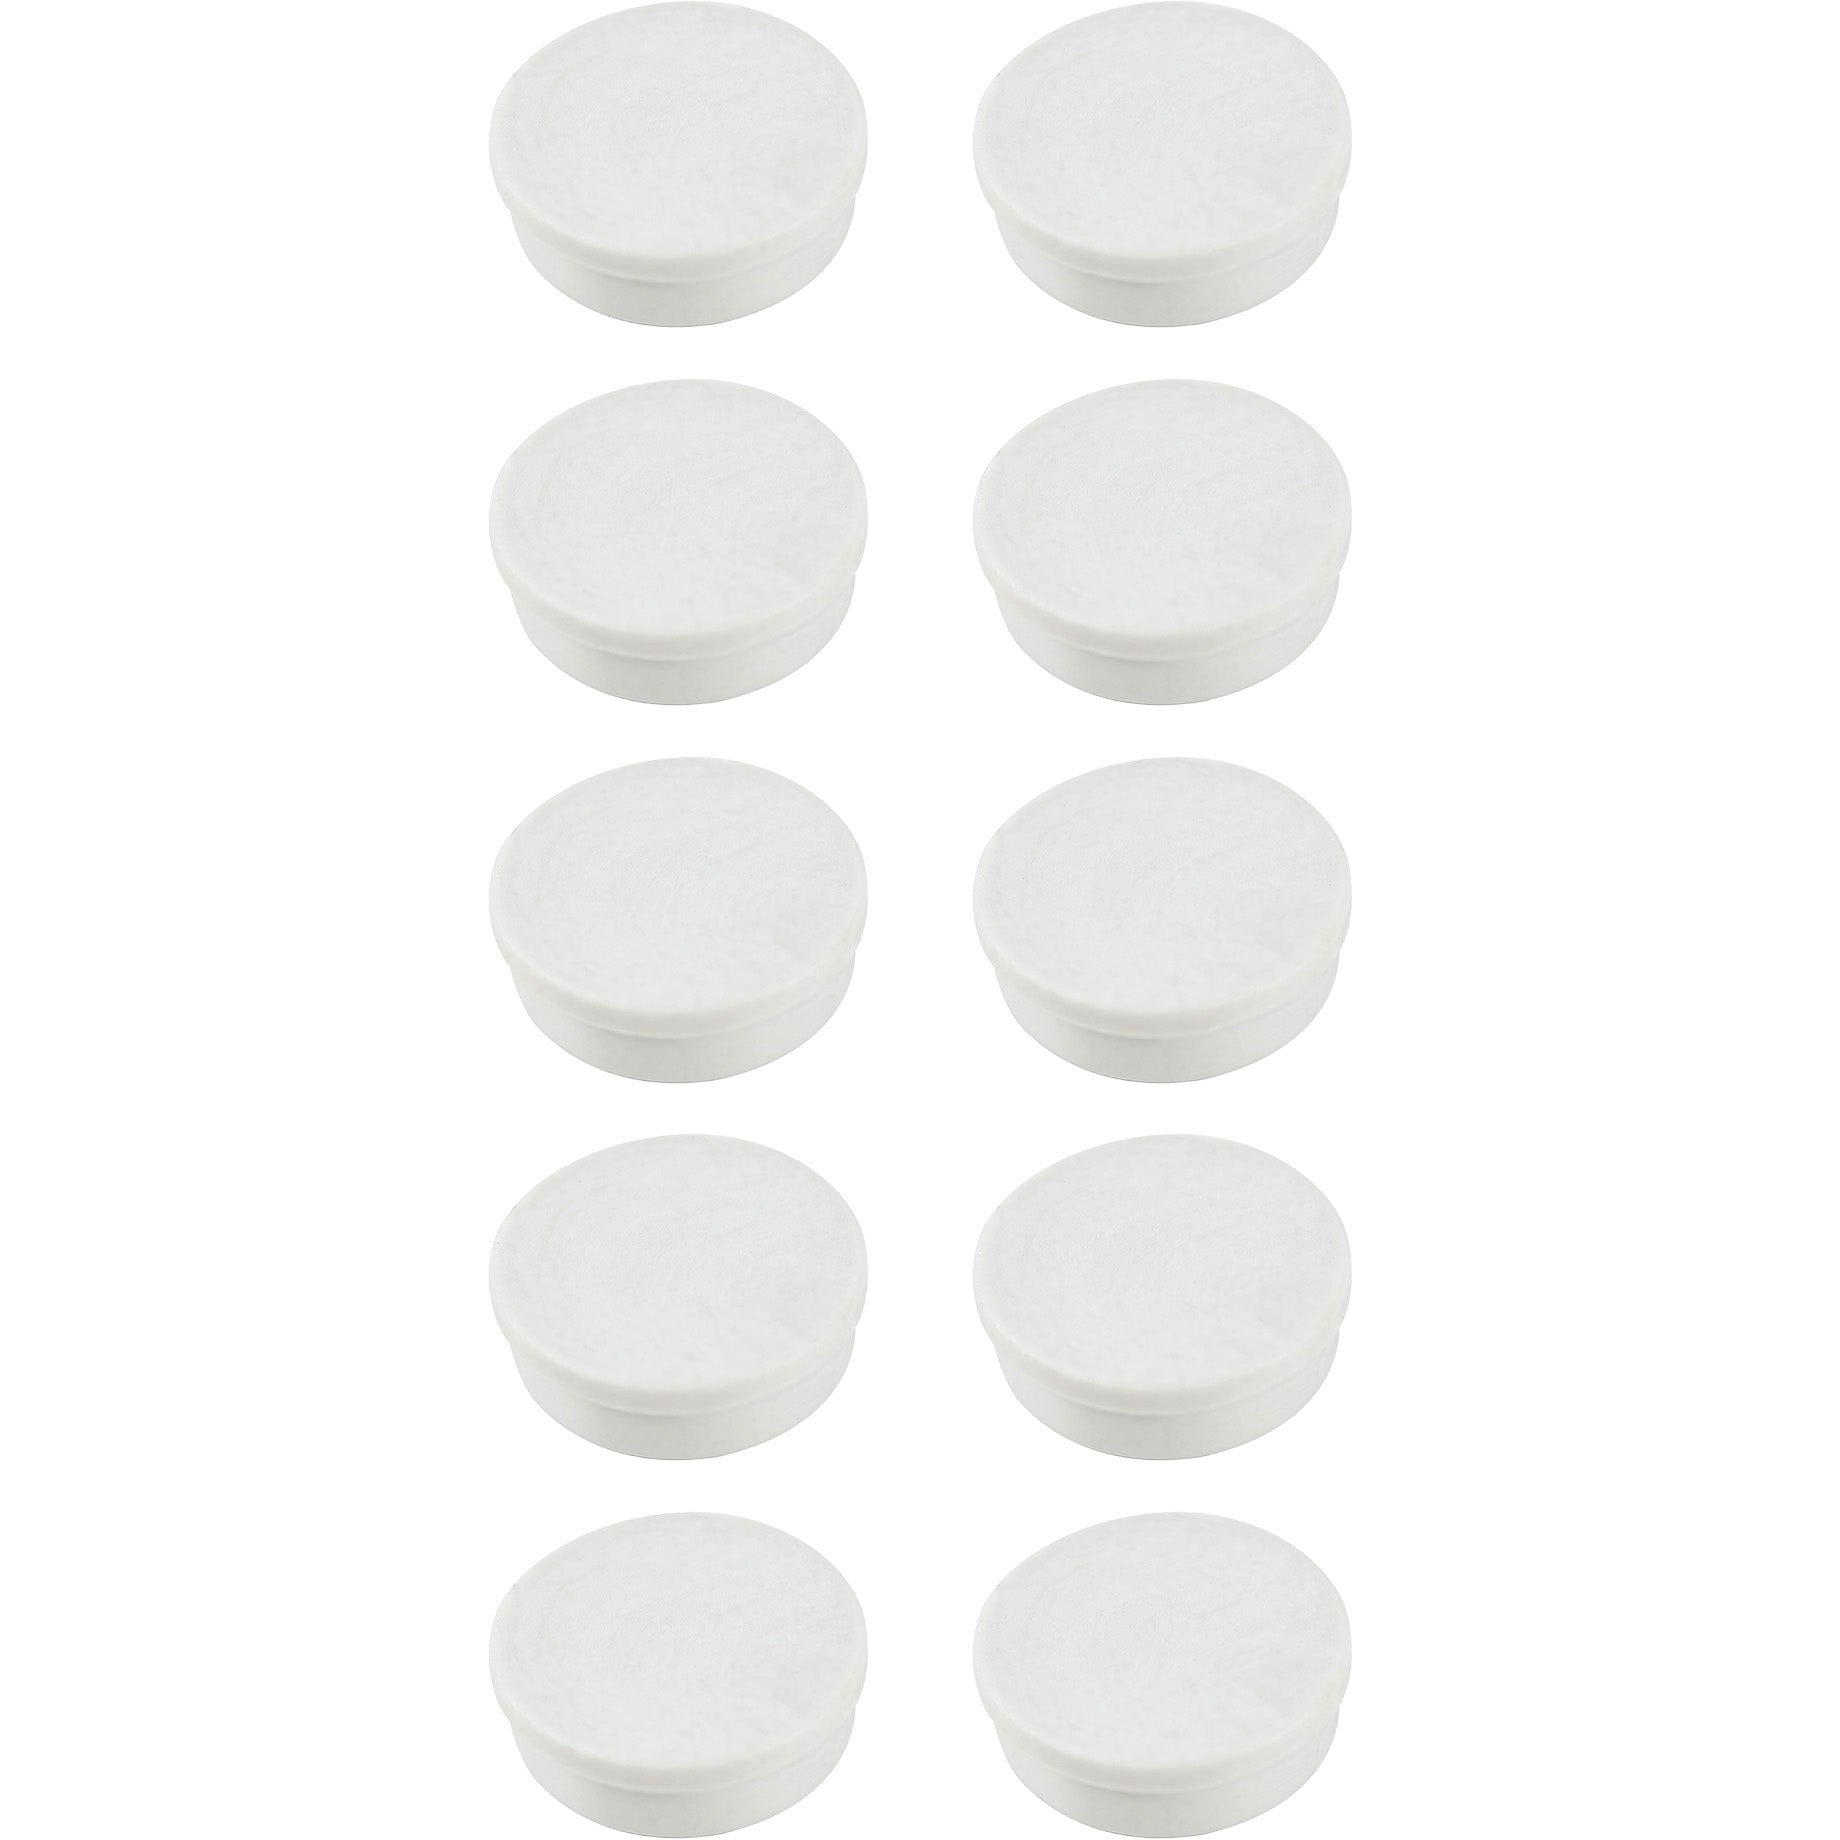 BIM141609 Antimicrobial Round Circle Magnet Pucks, 10 Pack, 1" Diameter, White, Great for Whiteboard, Fridge, Home, Office by MasterVision